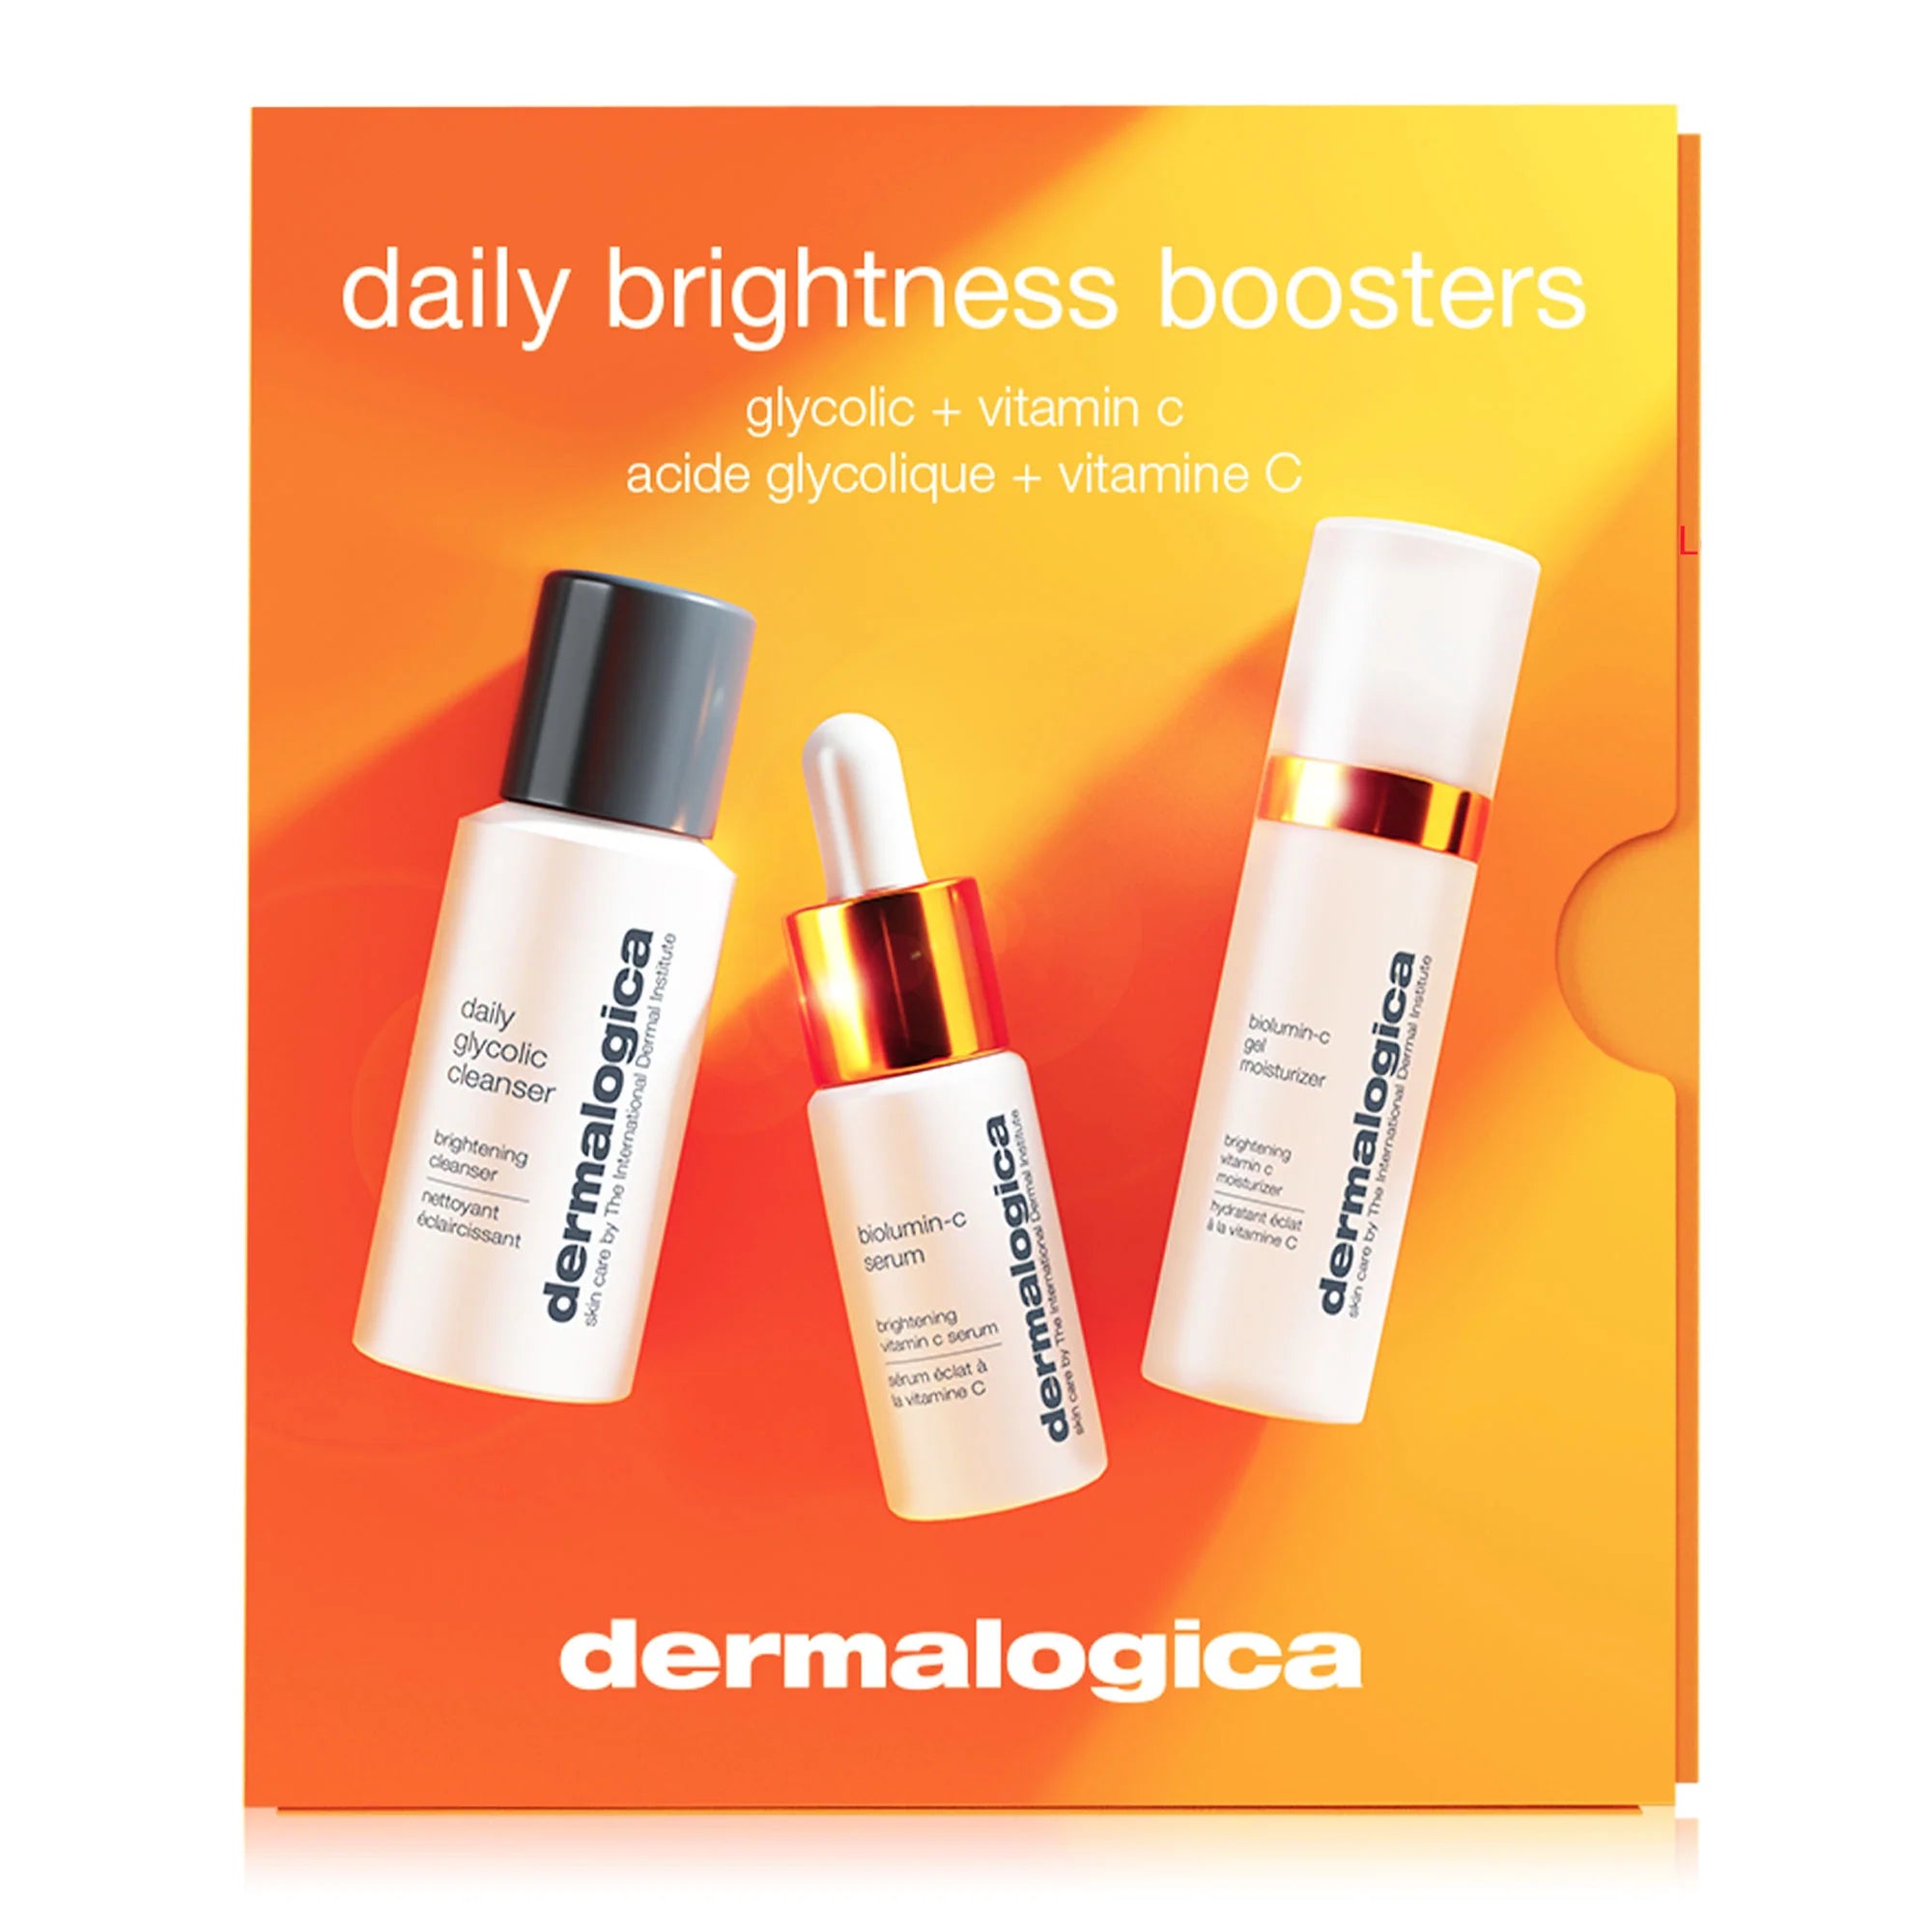 Dermalogica Daily Brightness Boosters, packaging